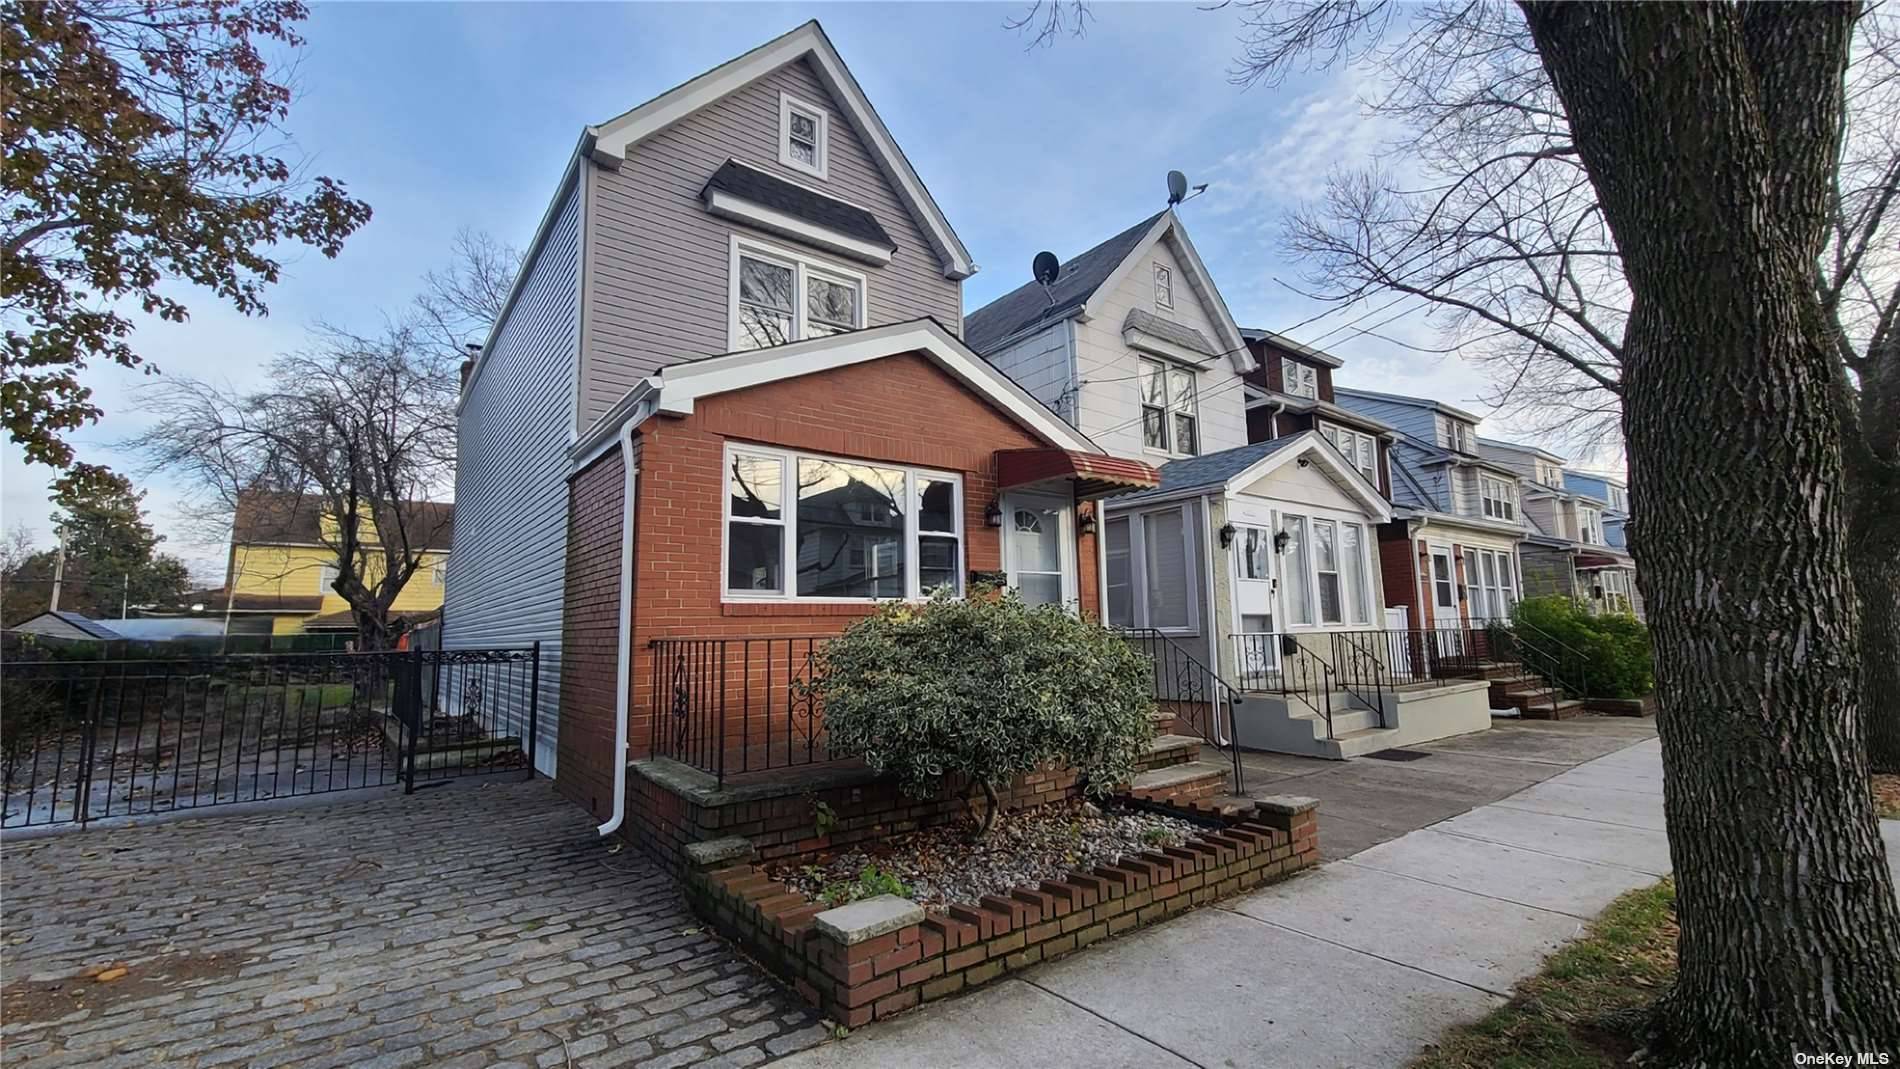 Welcome to a grand place to call home in Ozone Park.